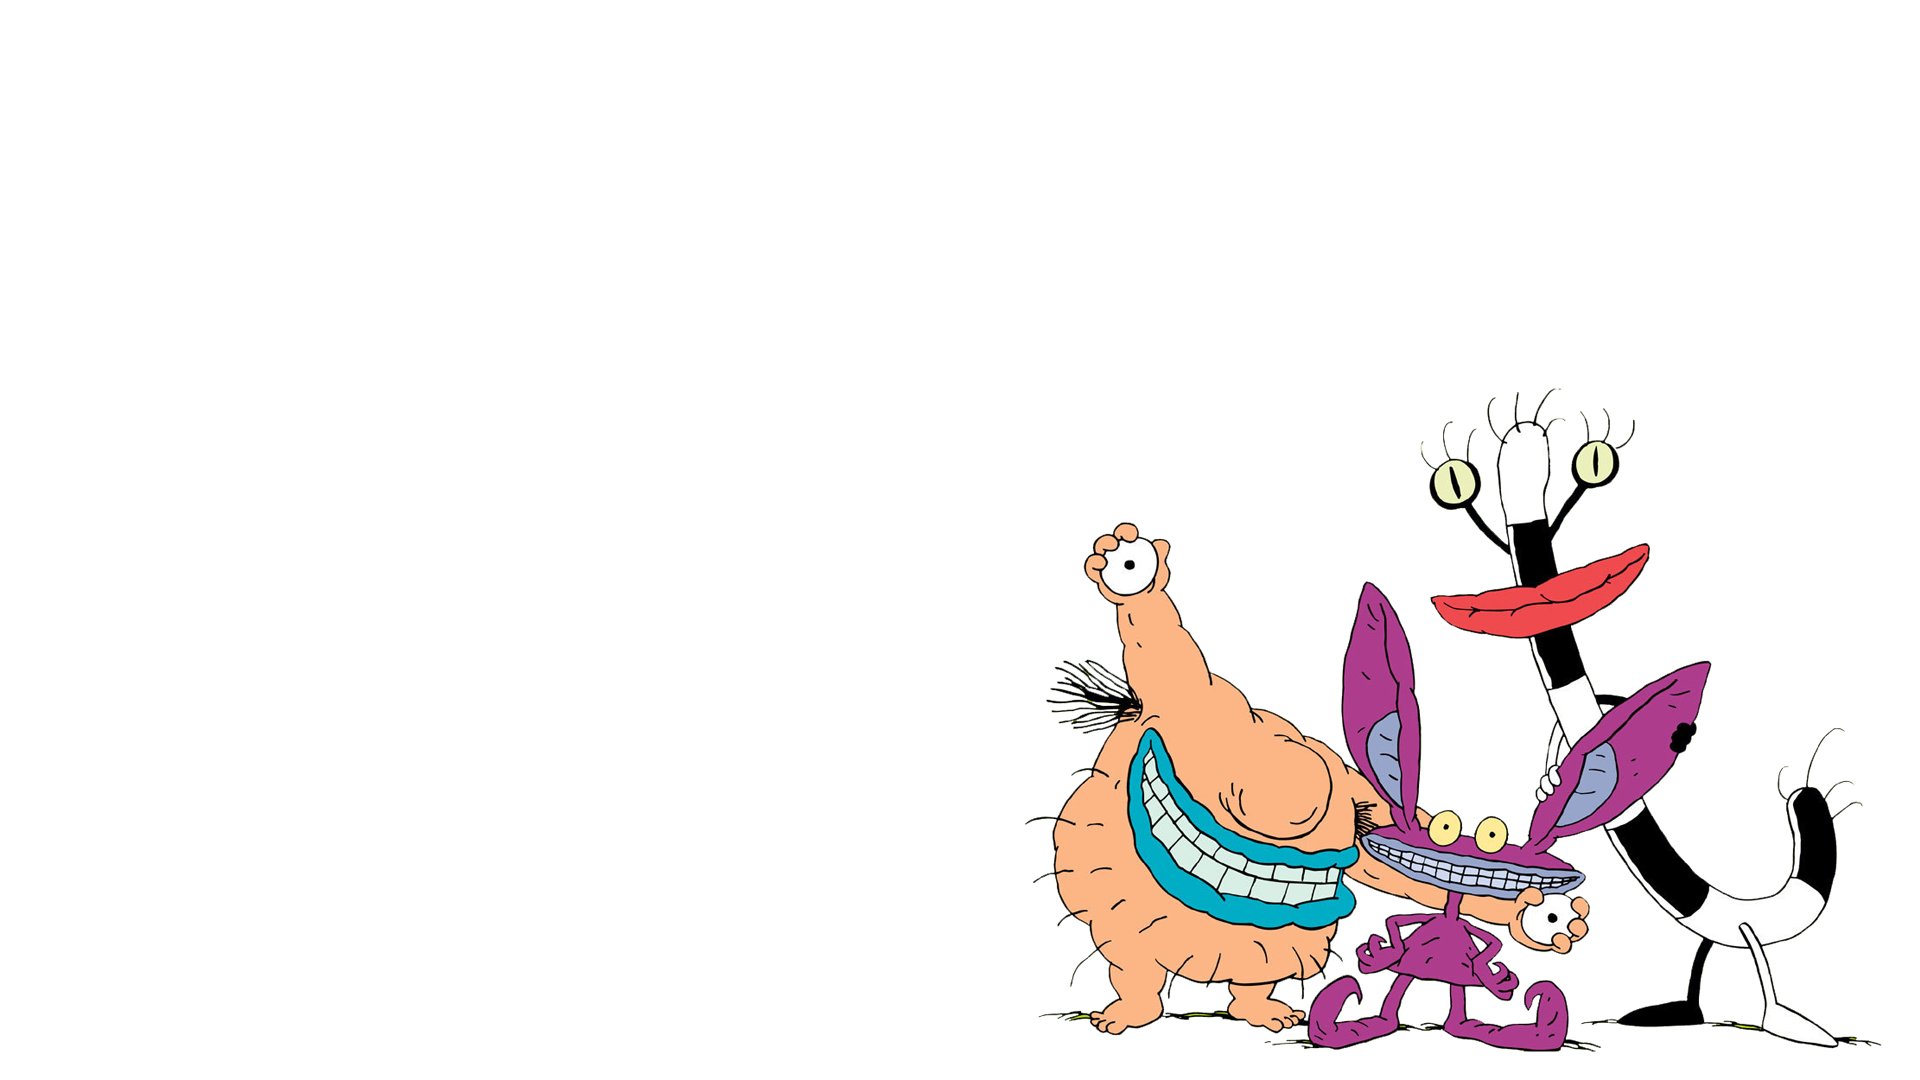 AAAHH REAL MONSTERS family animation cartton humor (1) wallpaperx1080